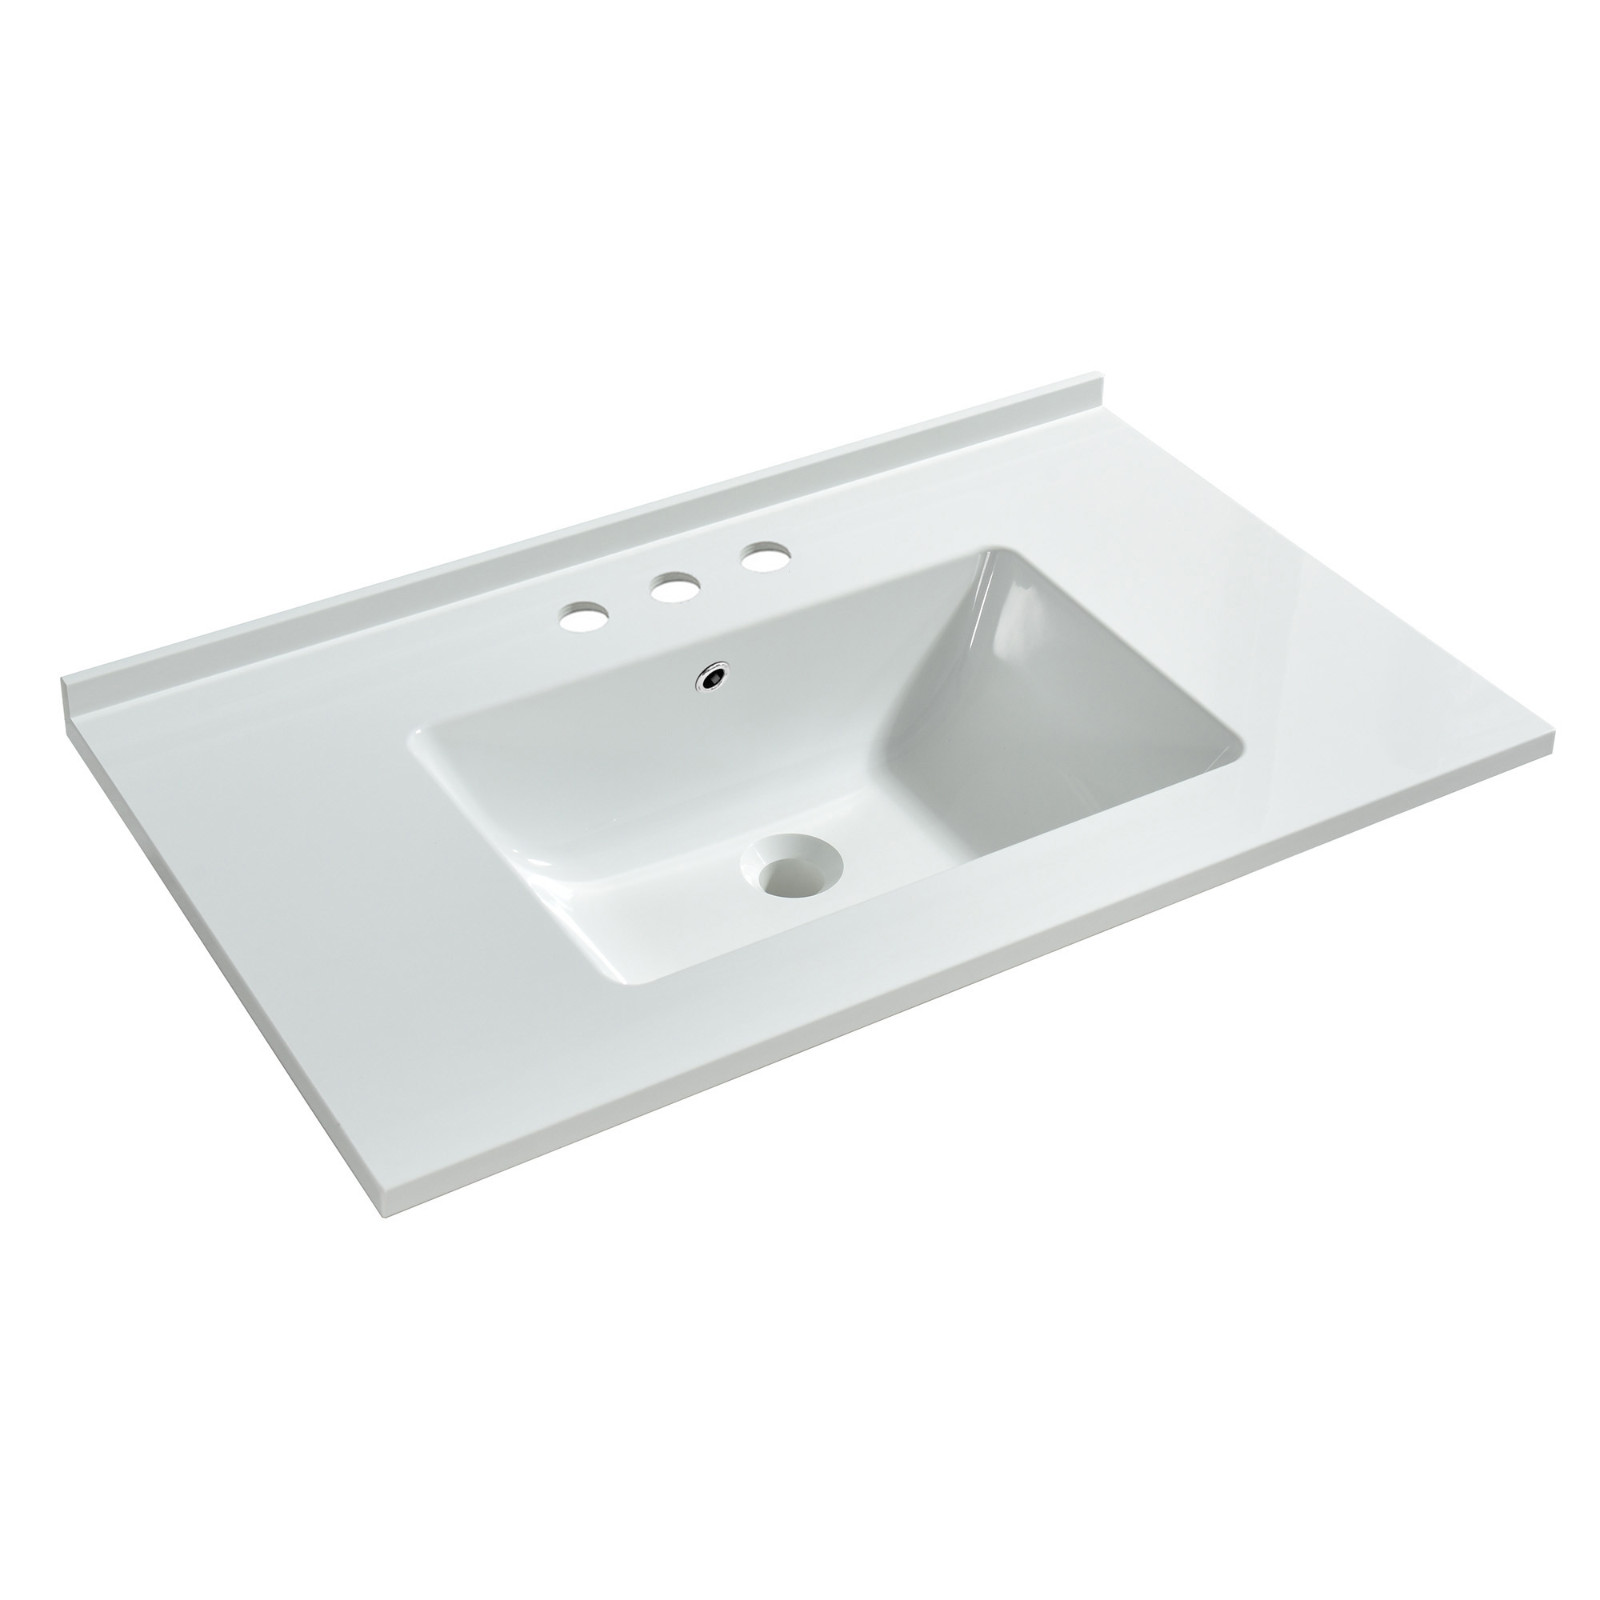  WOODBRIDGE VT3122-1000 Solid Surface Vanity Top with with Intergrated Sink and 3 Faucet Holes for 4-Inch Centerset Faucet, 31